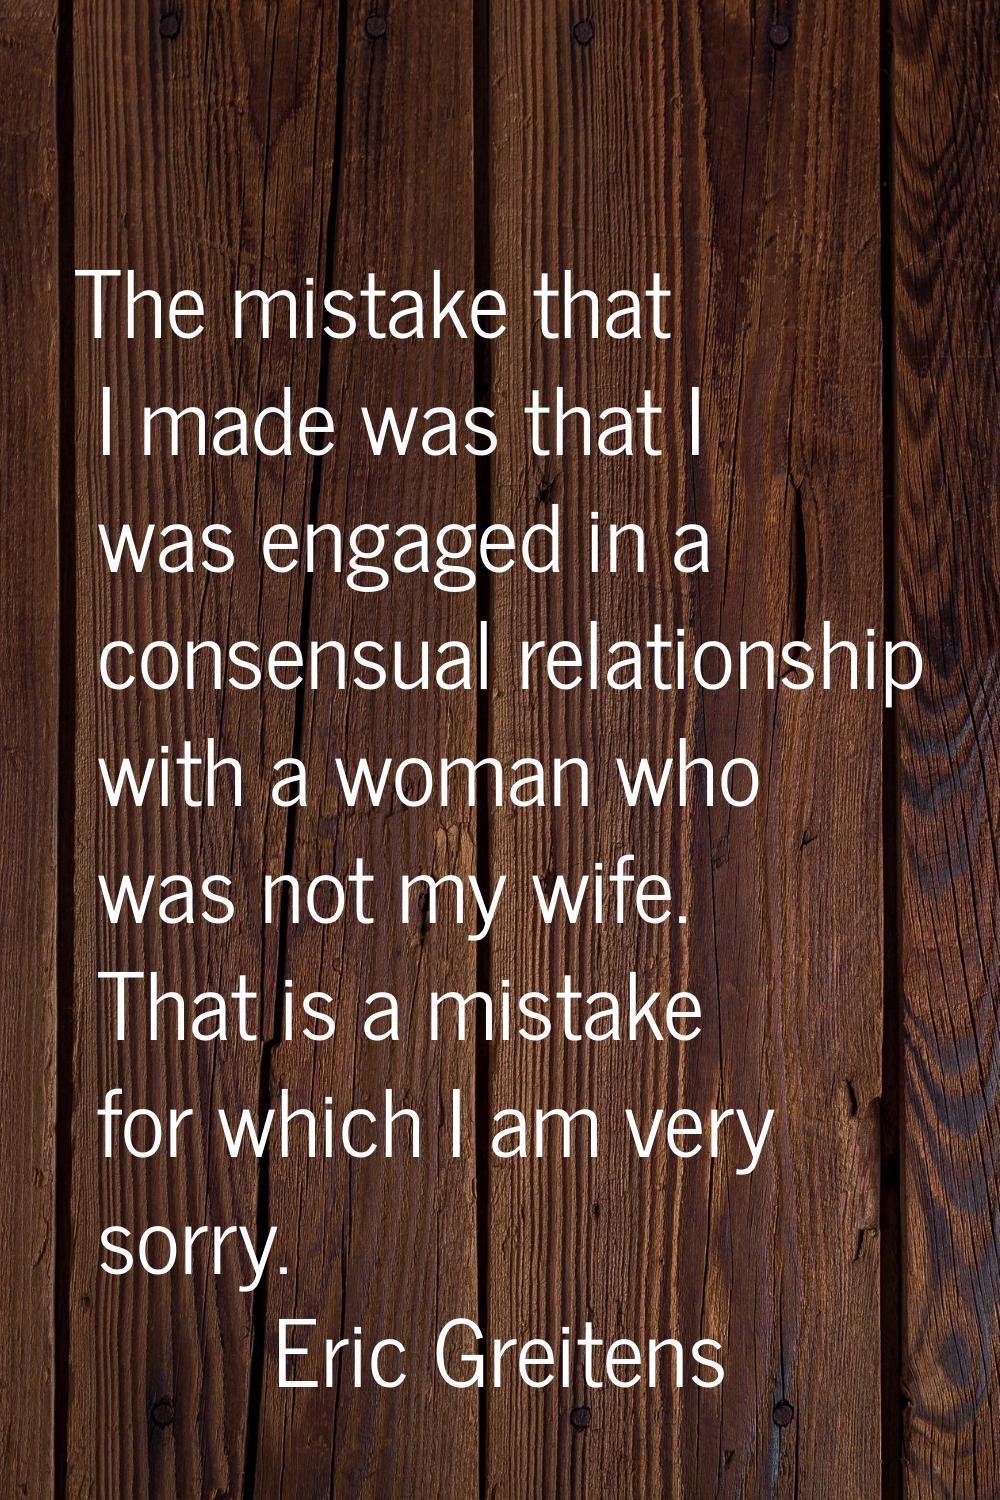 The mistake that I made was that I was engaged in a consensual relationship with a woman who was no